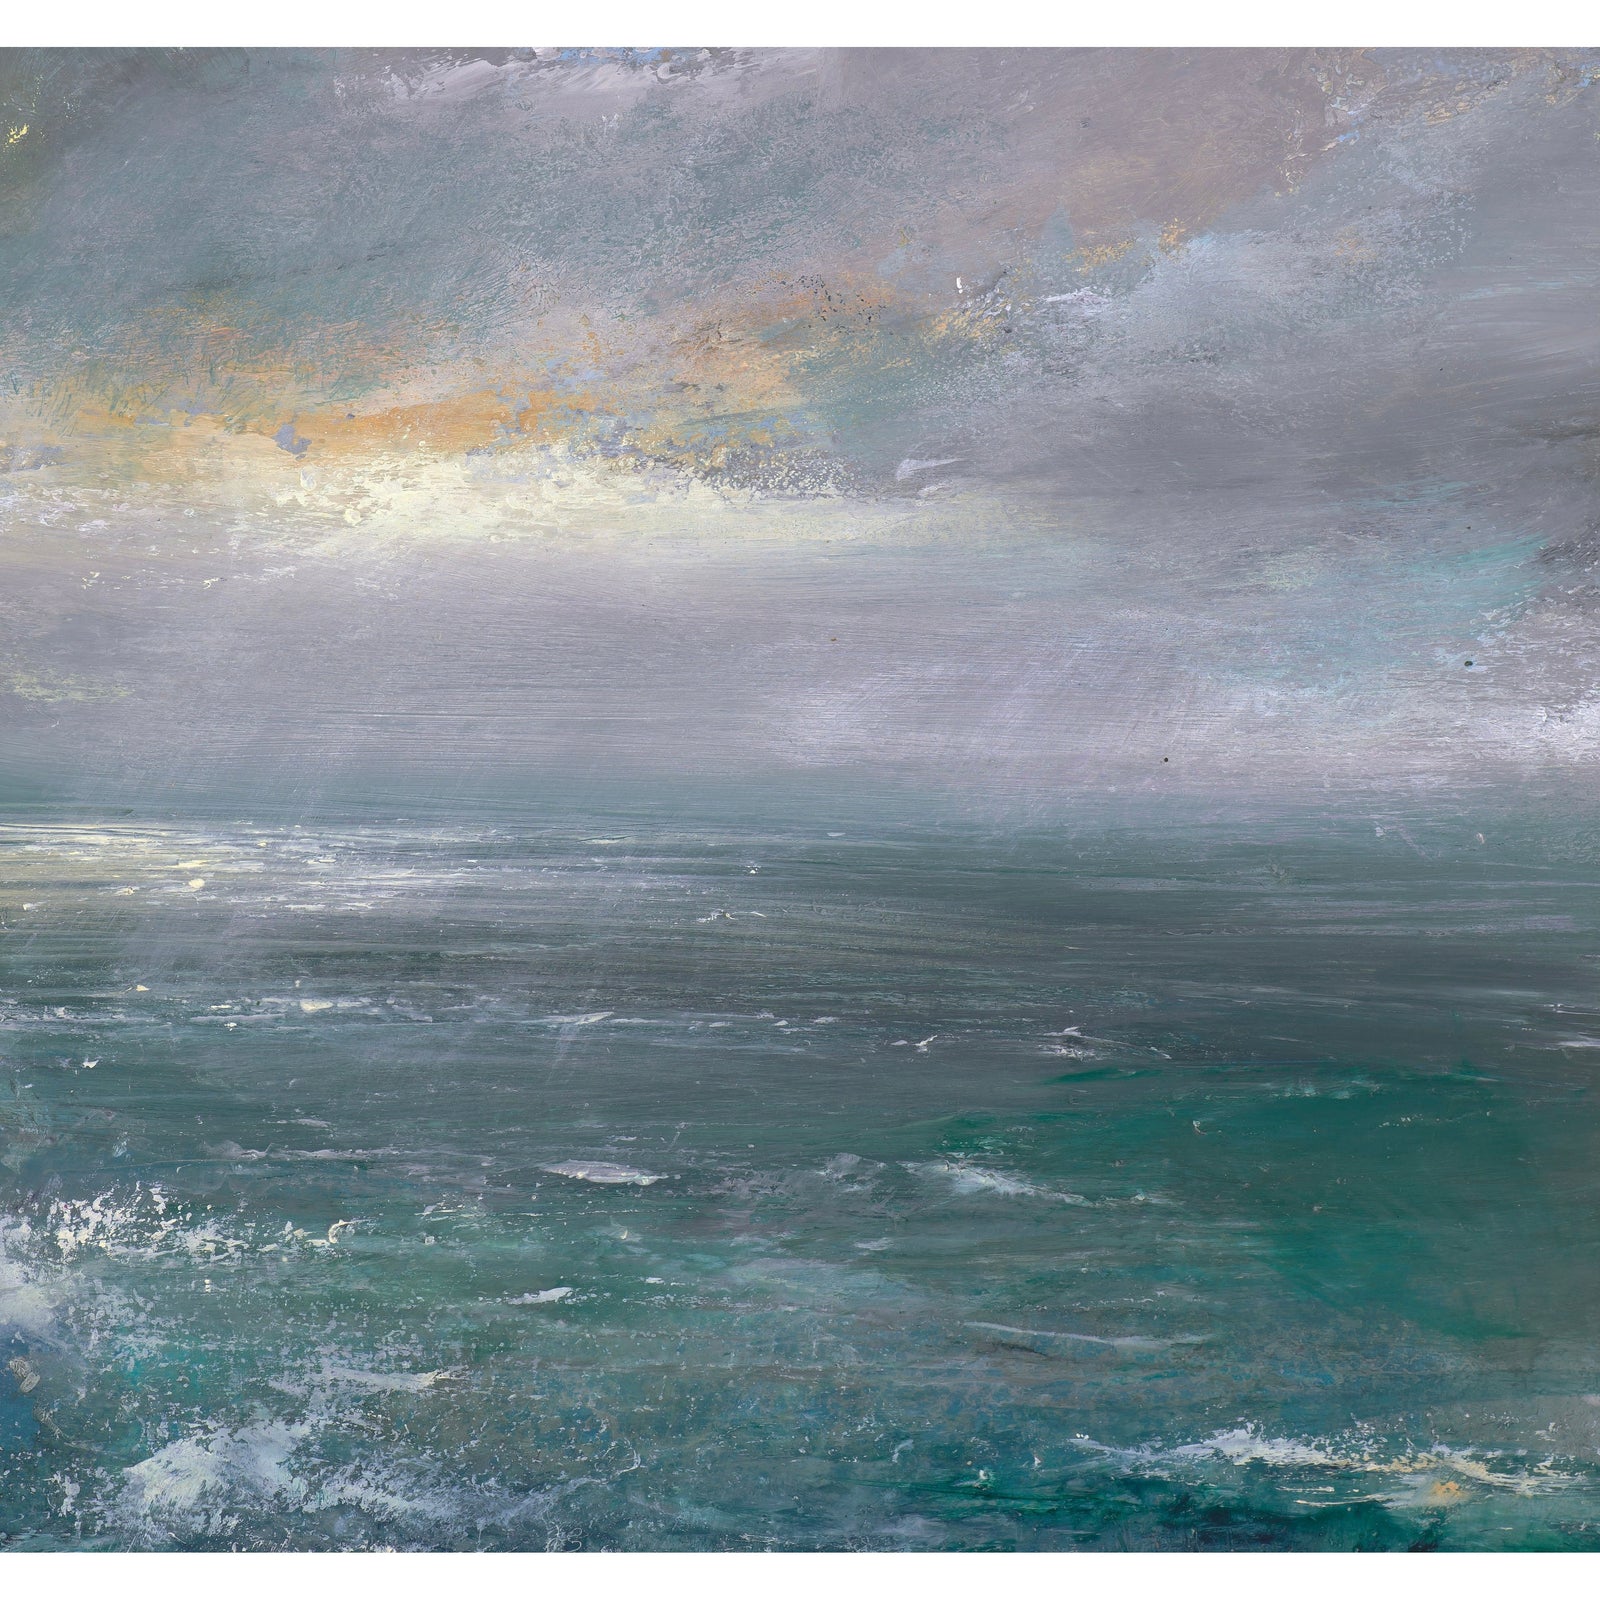 'The Energy Of The Sea' mixed media on mylar paper original by Amanda Hoskin, available at Padstow Gallery, Cornwall